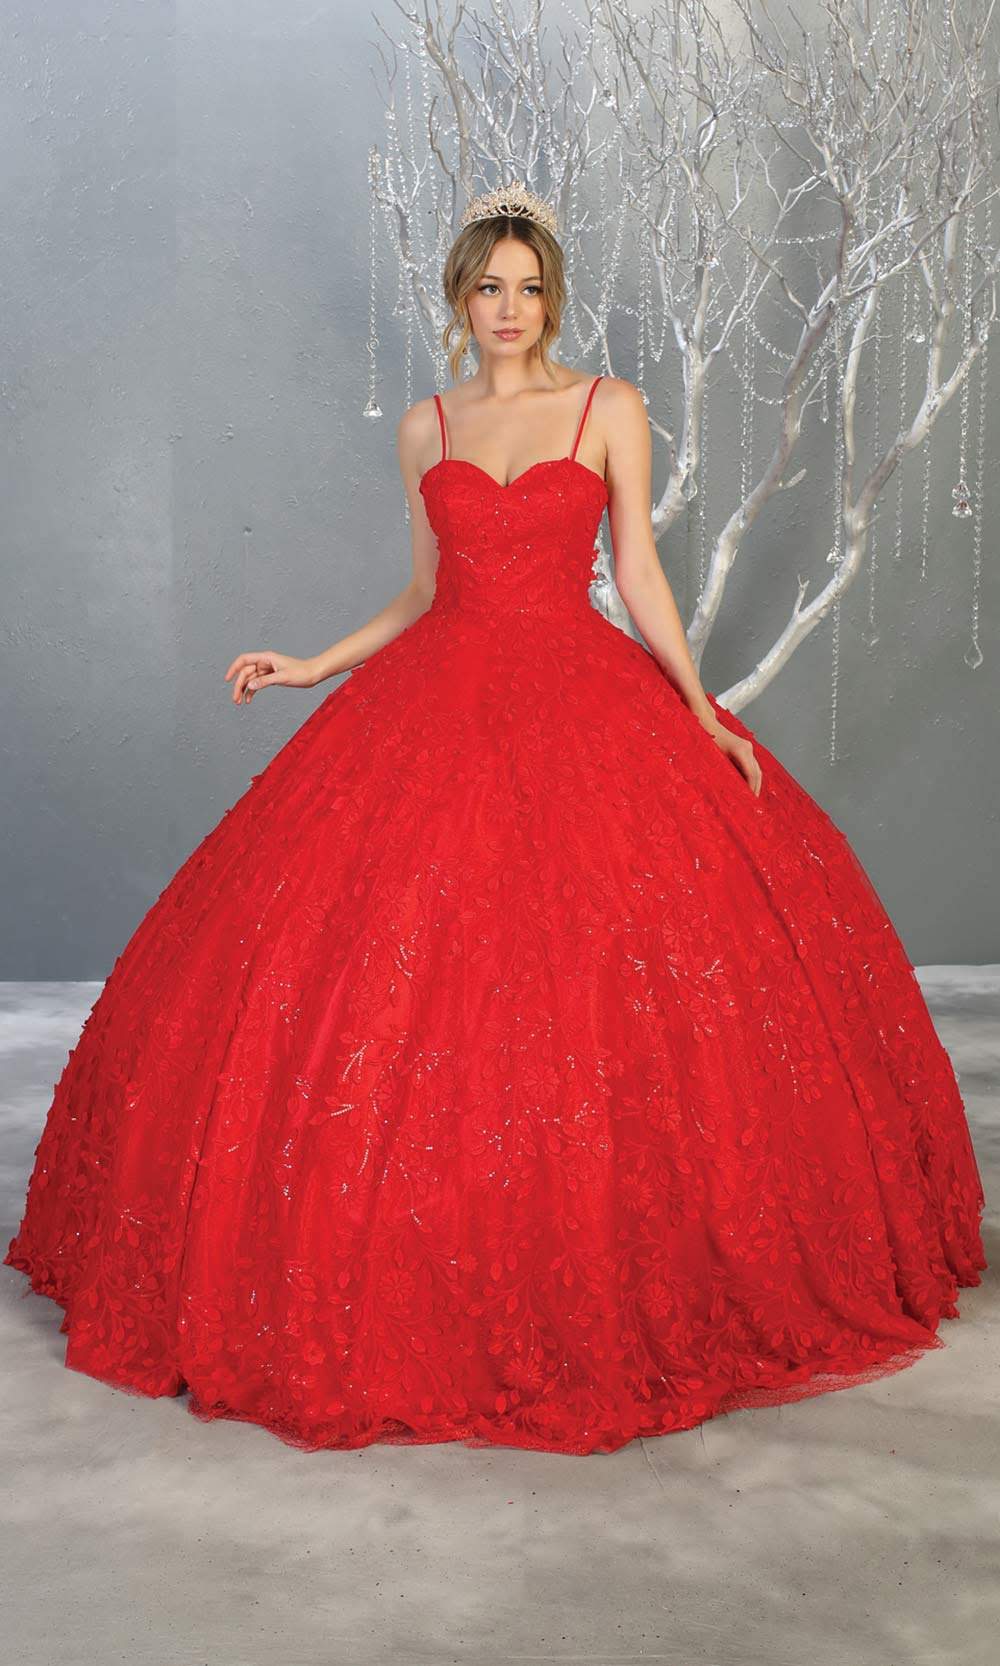 Mayqueen LK150 red quinceanera ball gown w/lace detail & thin straps. This red ball gown is perfect for engagement dress, wedding reception, indowestern party gown, sweet 16, debut, sweet 15, sweet 18. Plus sizes available for red ballgowns.jpg